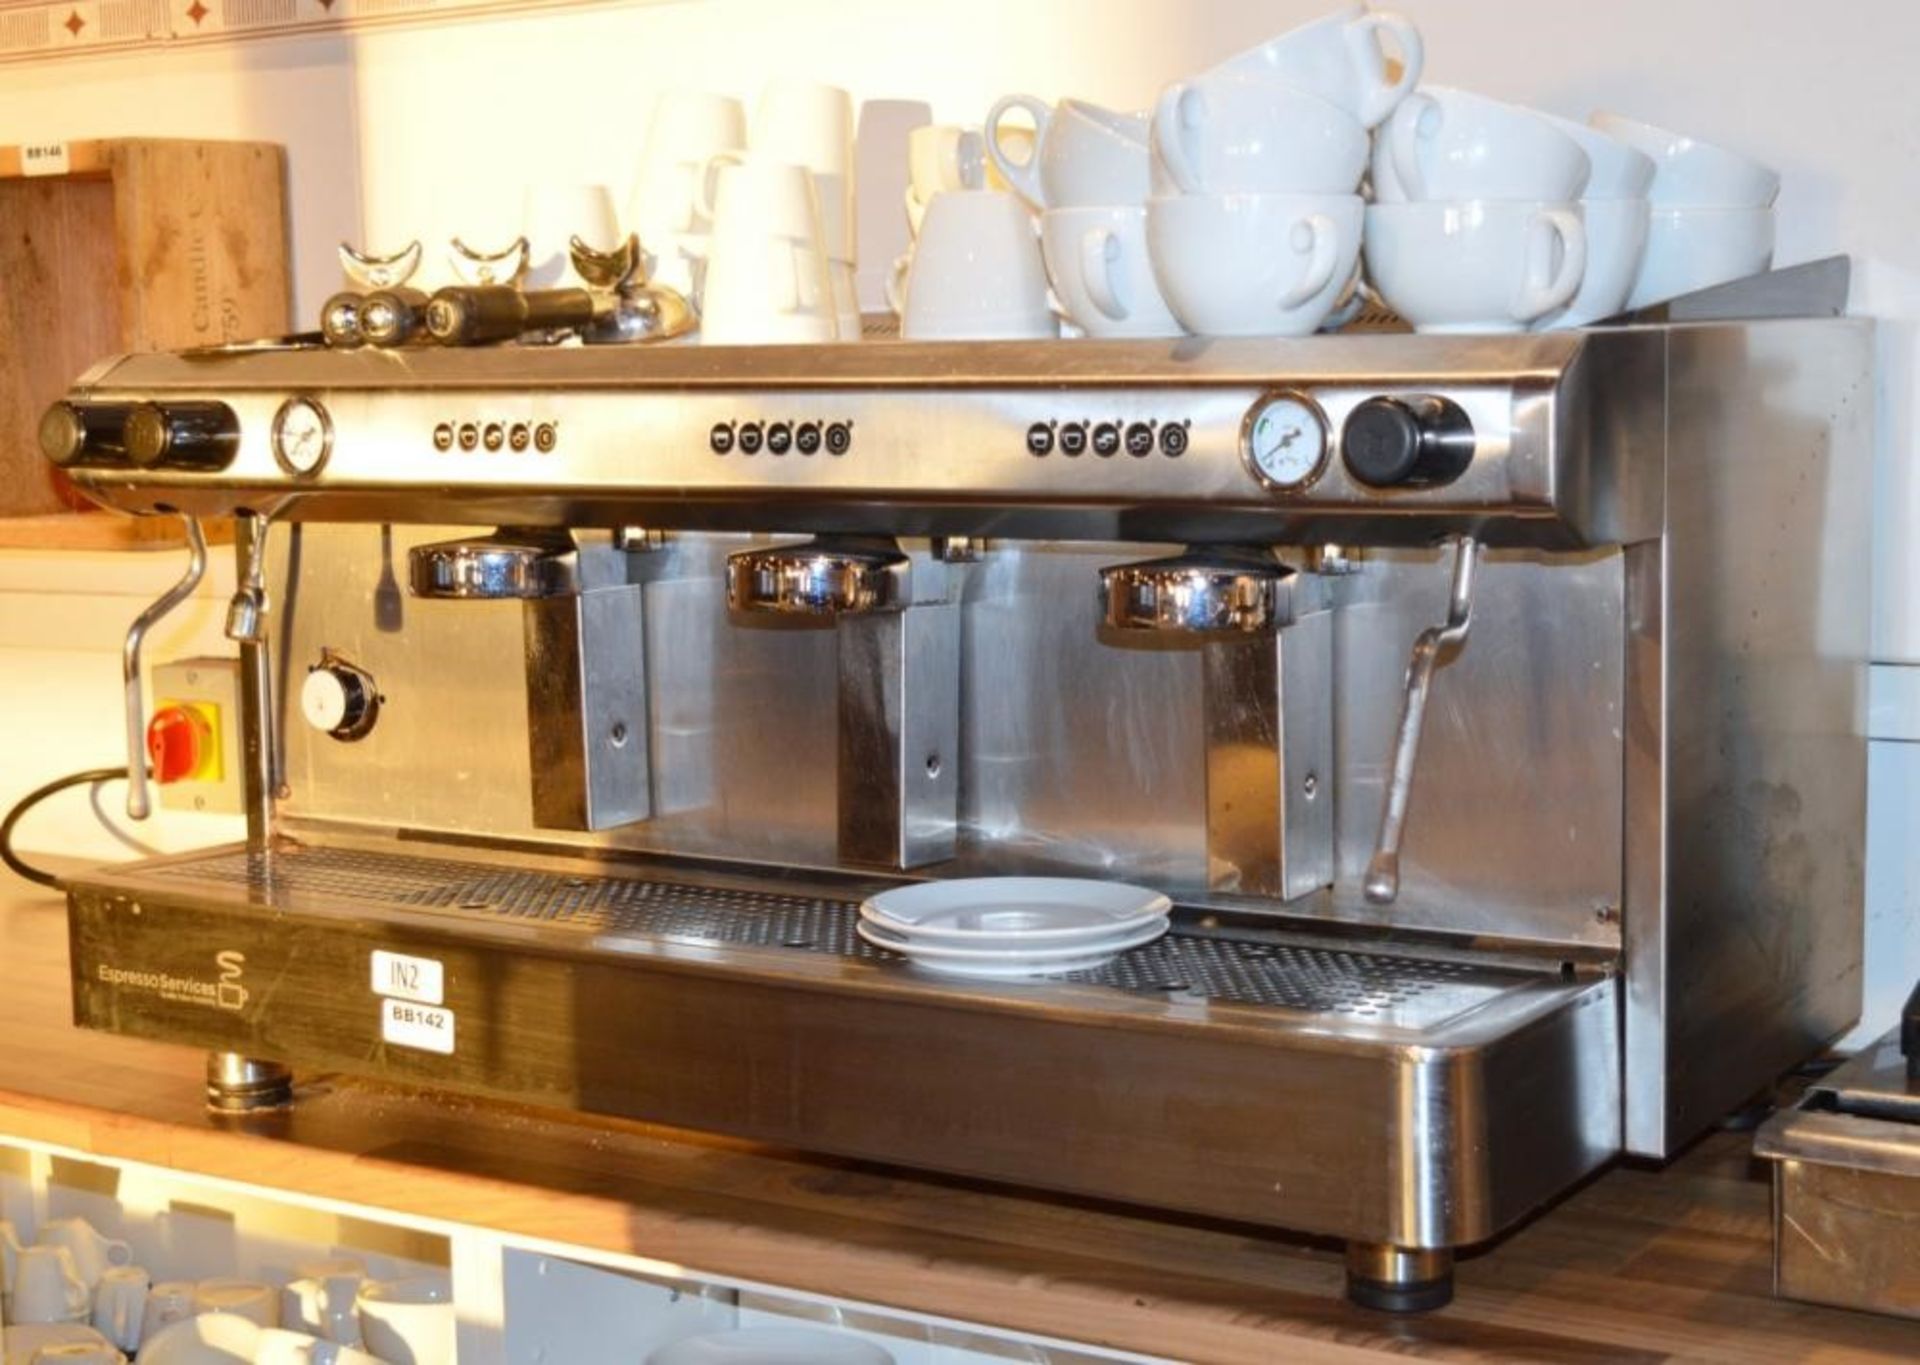 1 x Stainless Steel Three Group Commercial Coffee Machine With Filter Holders - H43 x W94 x D51 cms - Image 3 of 4